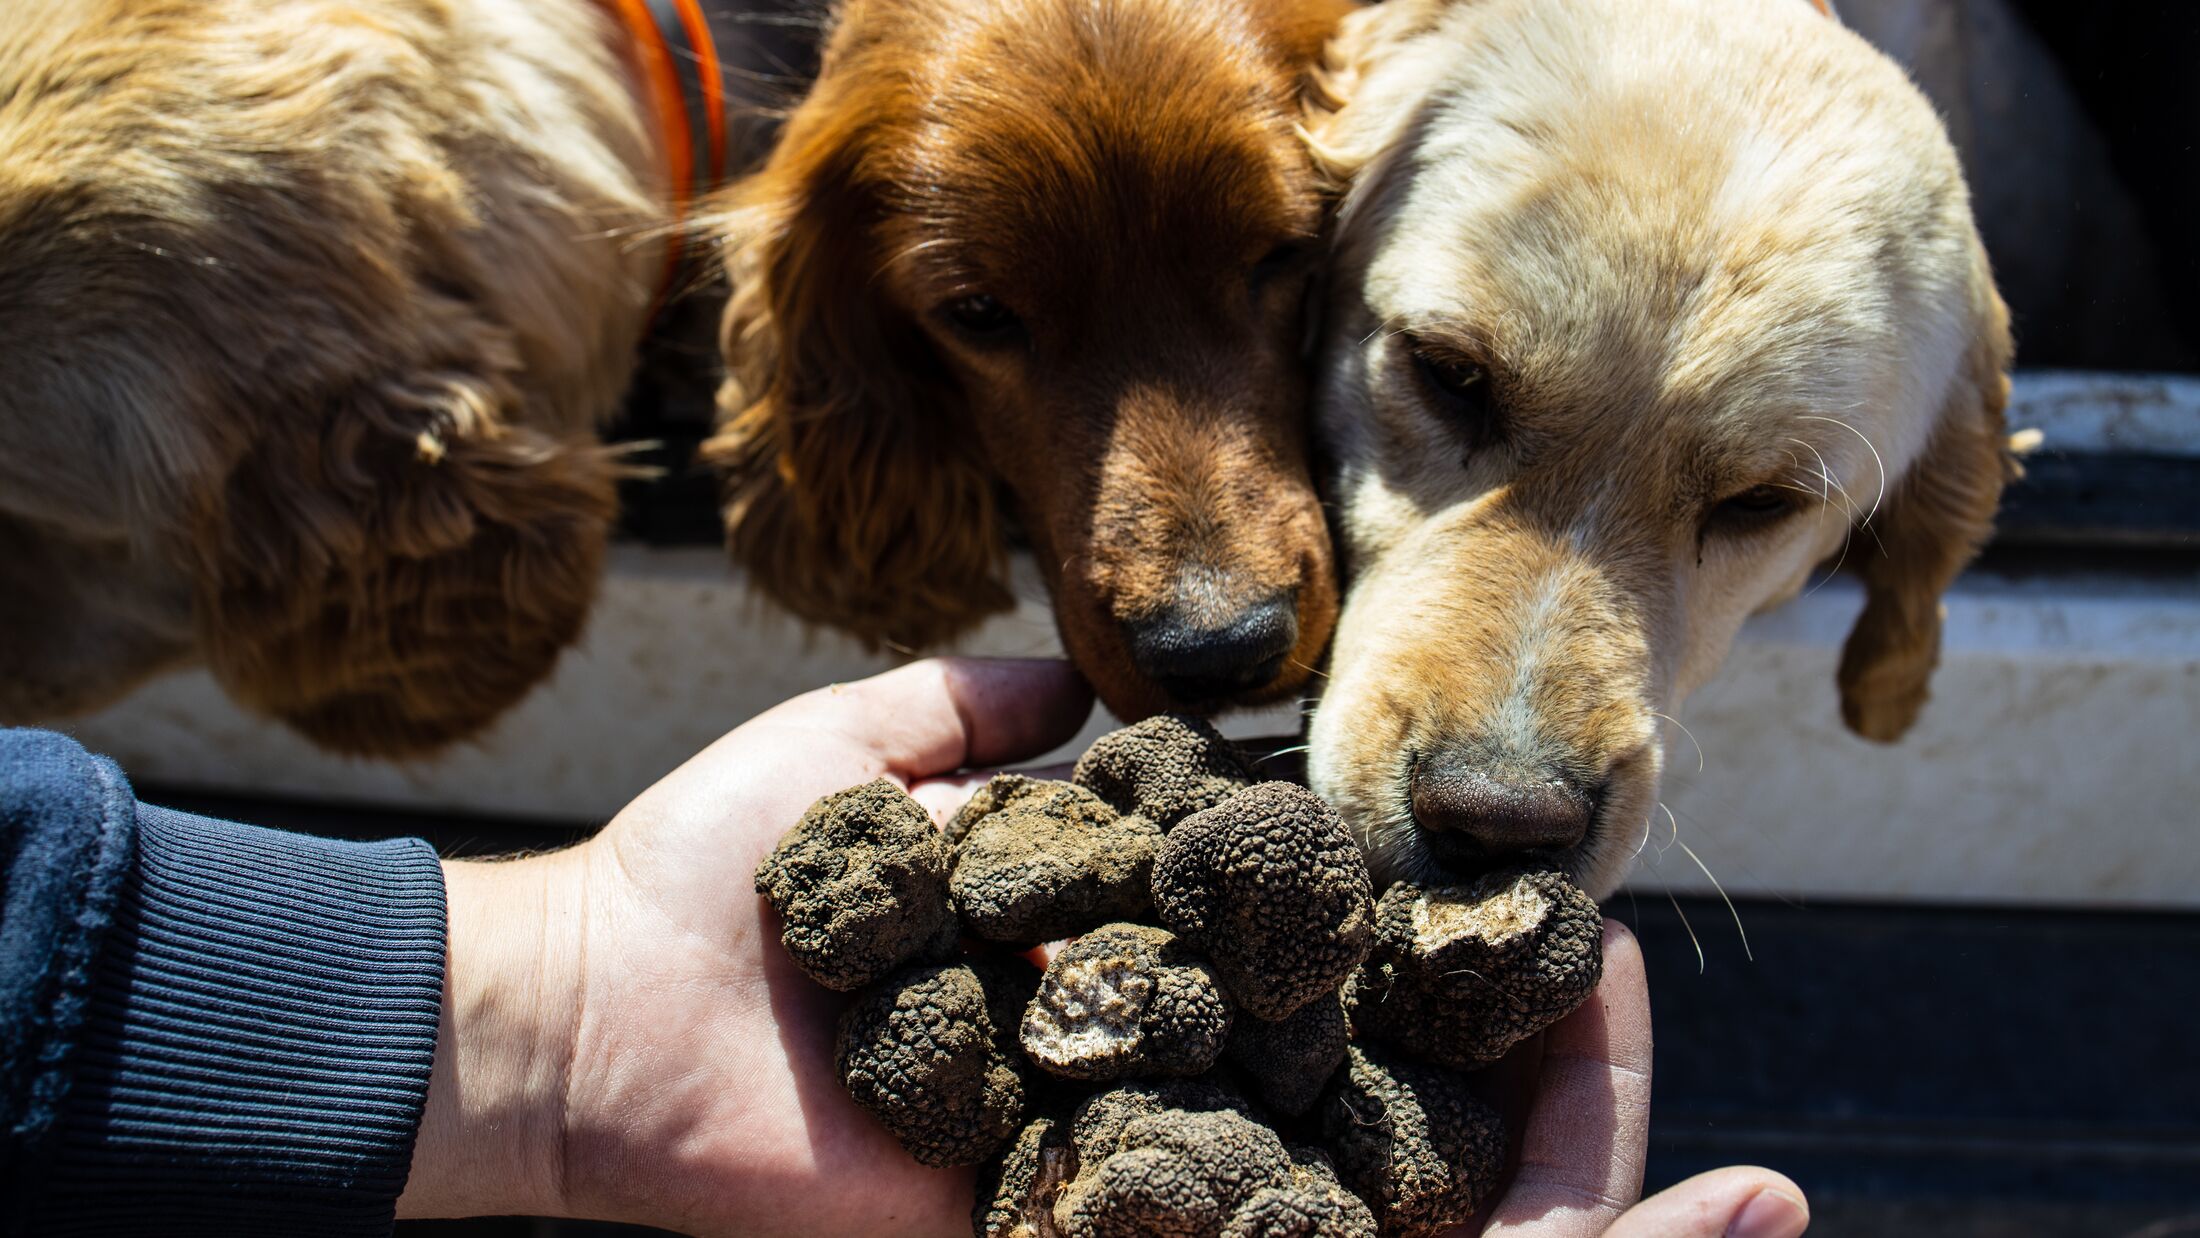 A man holding mushrooms black truffles in front of a Cocker Spaniel dogs. Dogs in a car